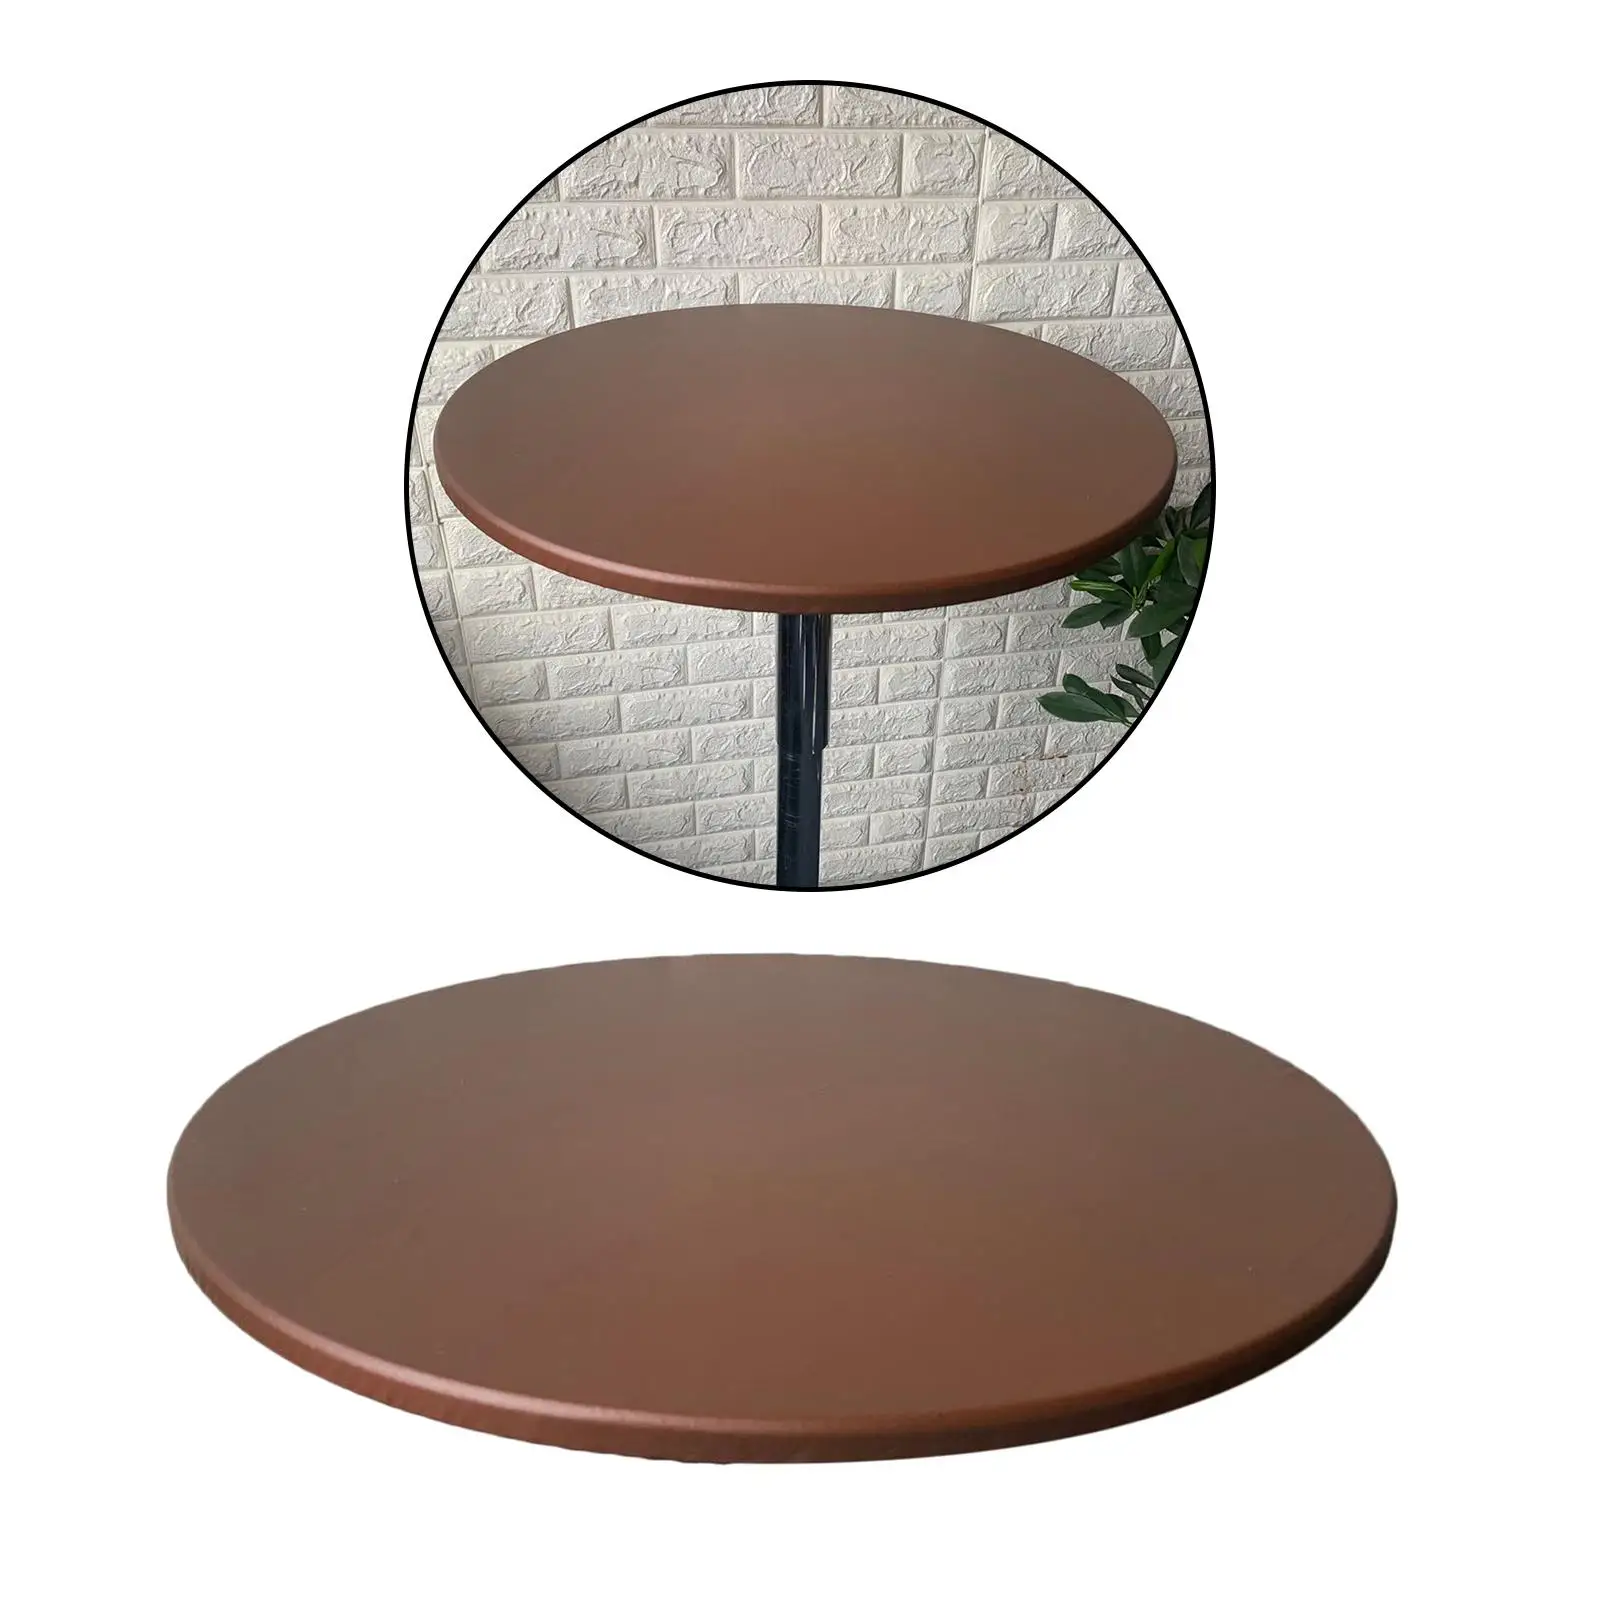 Anti-slip Round Table Cover Cloth Waterproof Tablecover Protector